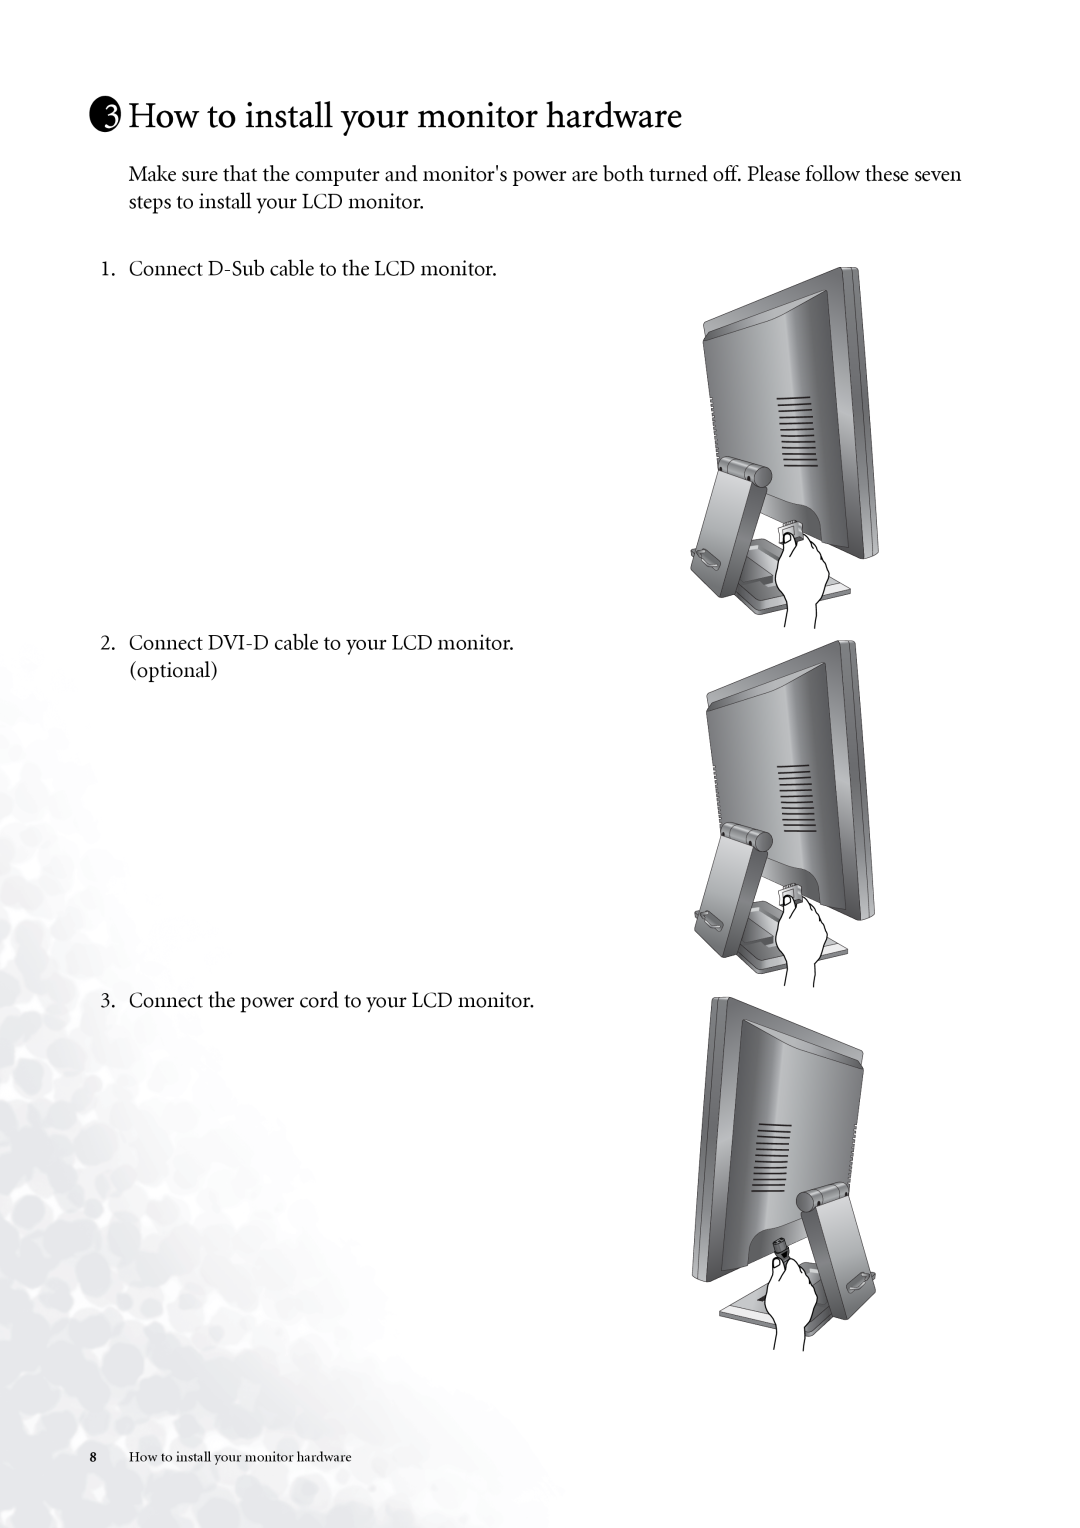 BenQ FP937s user manual How to install your monitor hardware, Connect D-Sub cable to the LCD monitor 